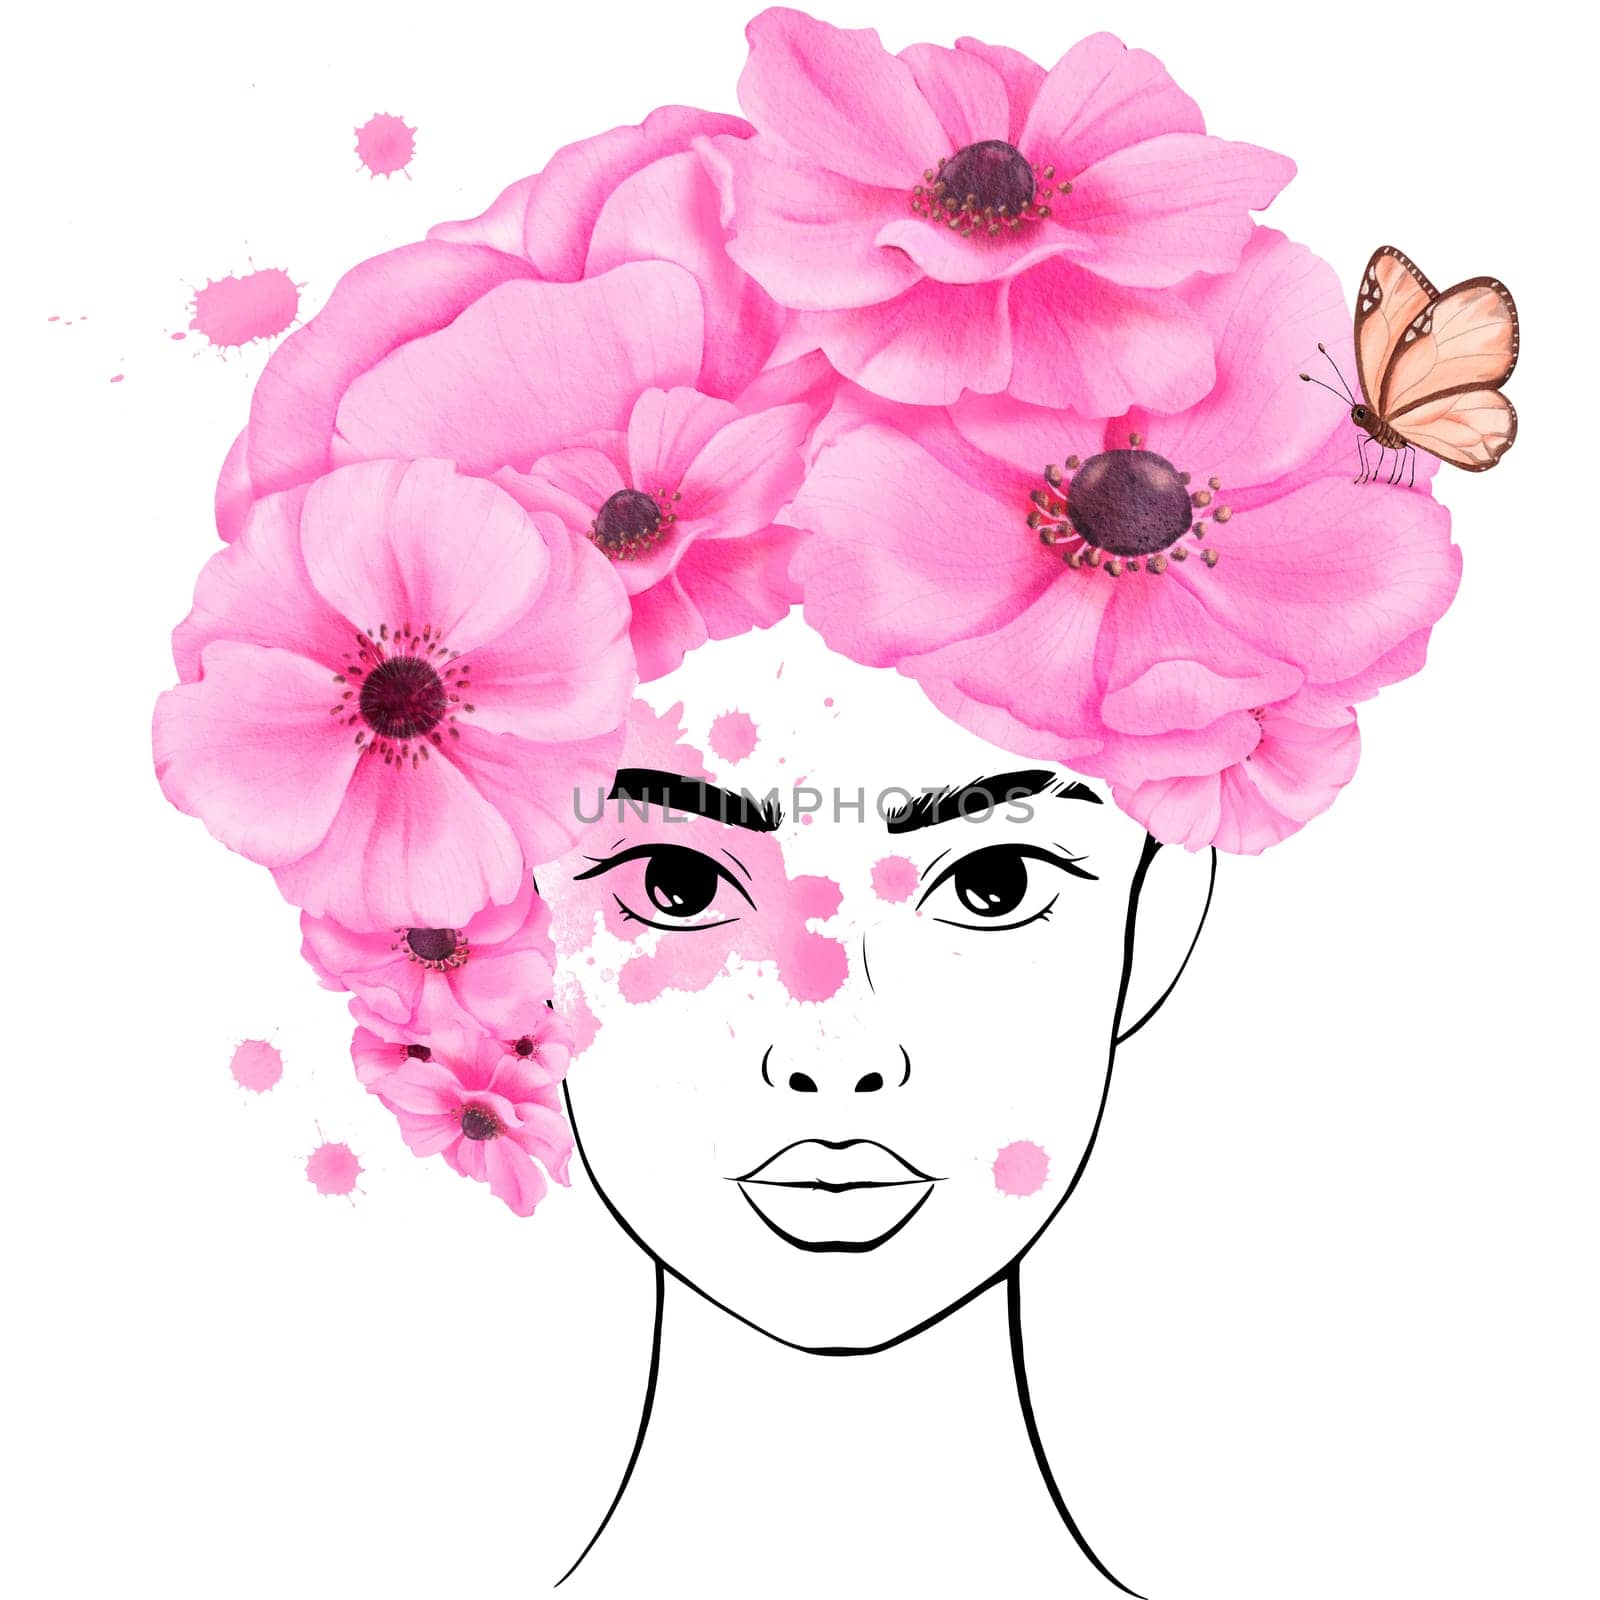 A linear portrait of a beautiful young woman, with her hair styled using pink anemone flowers and adorned with a butterfly, watercolor illustration. Symbolizing brightness and inspiration for avatars.